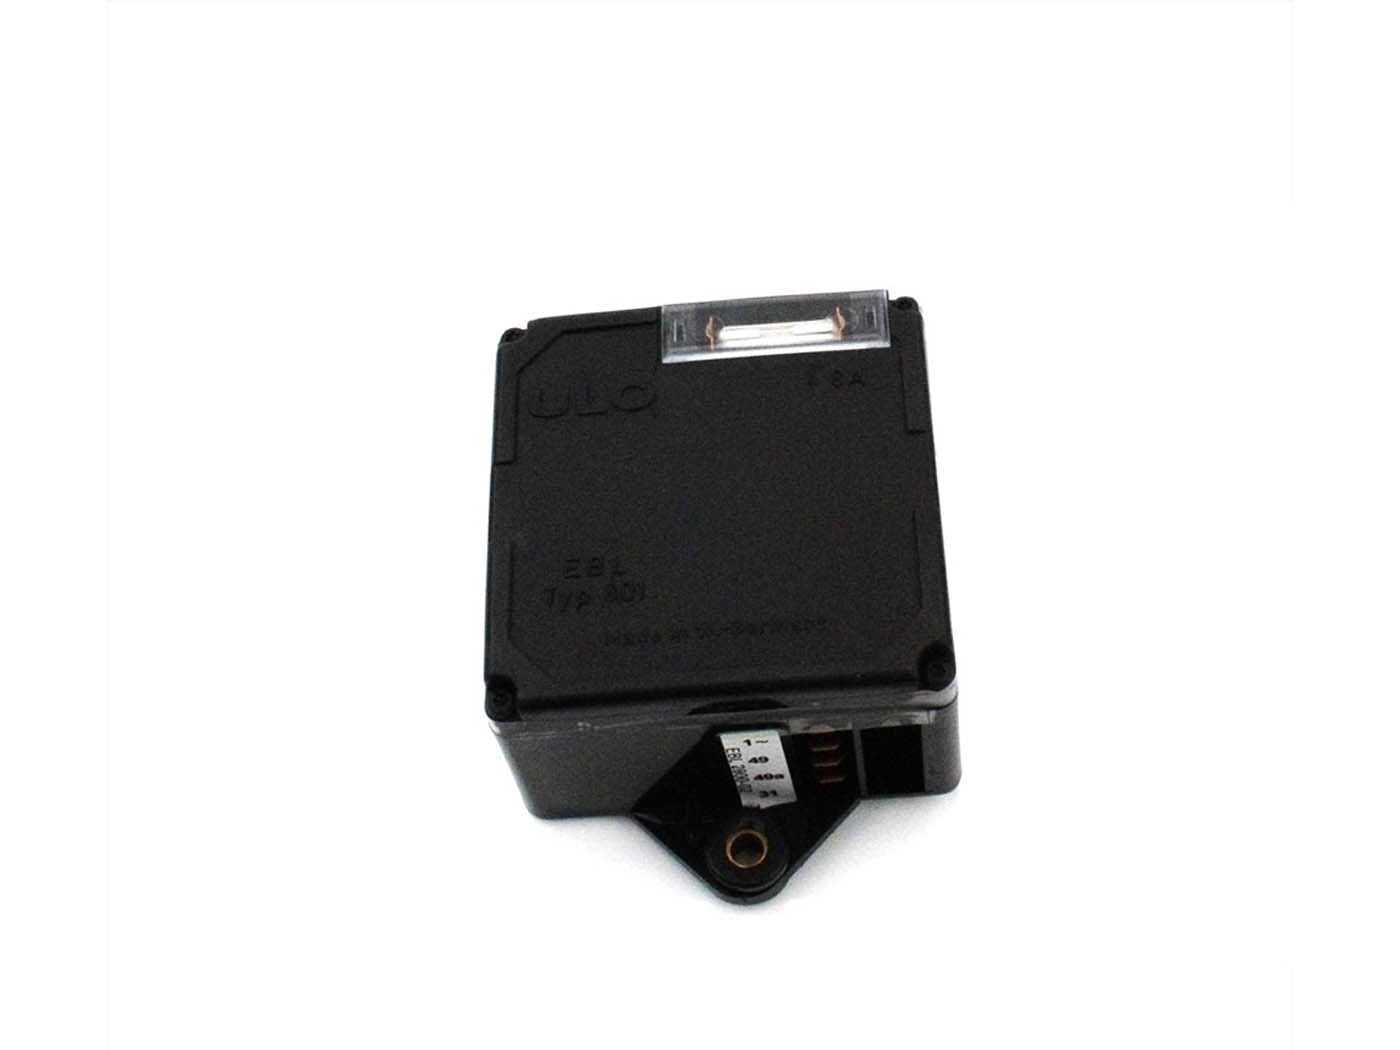 ULO Box EBL 801 Charge Controller For Hercules K